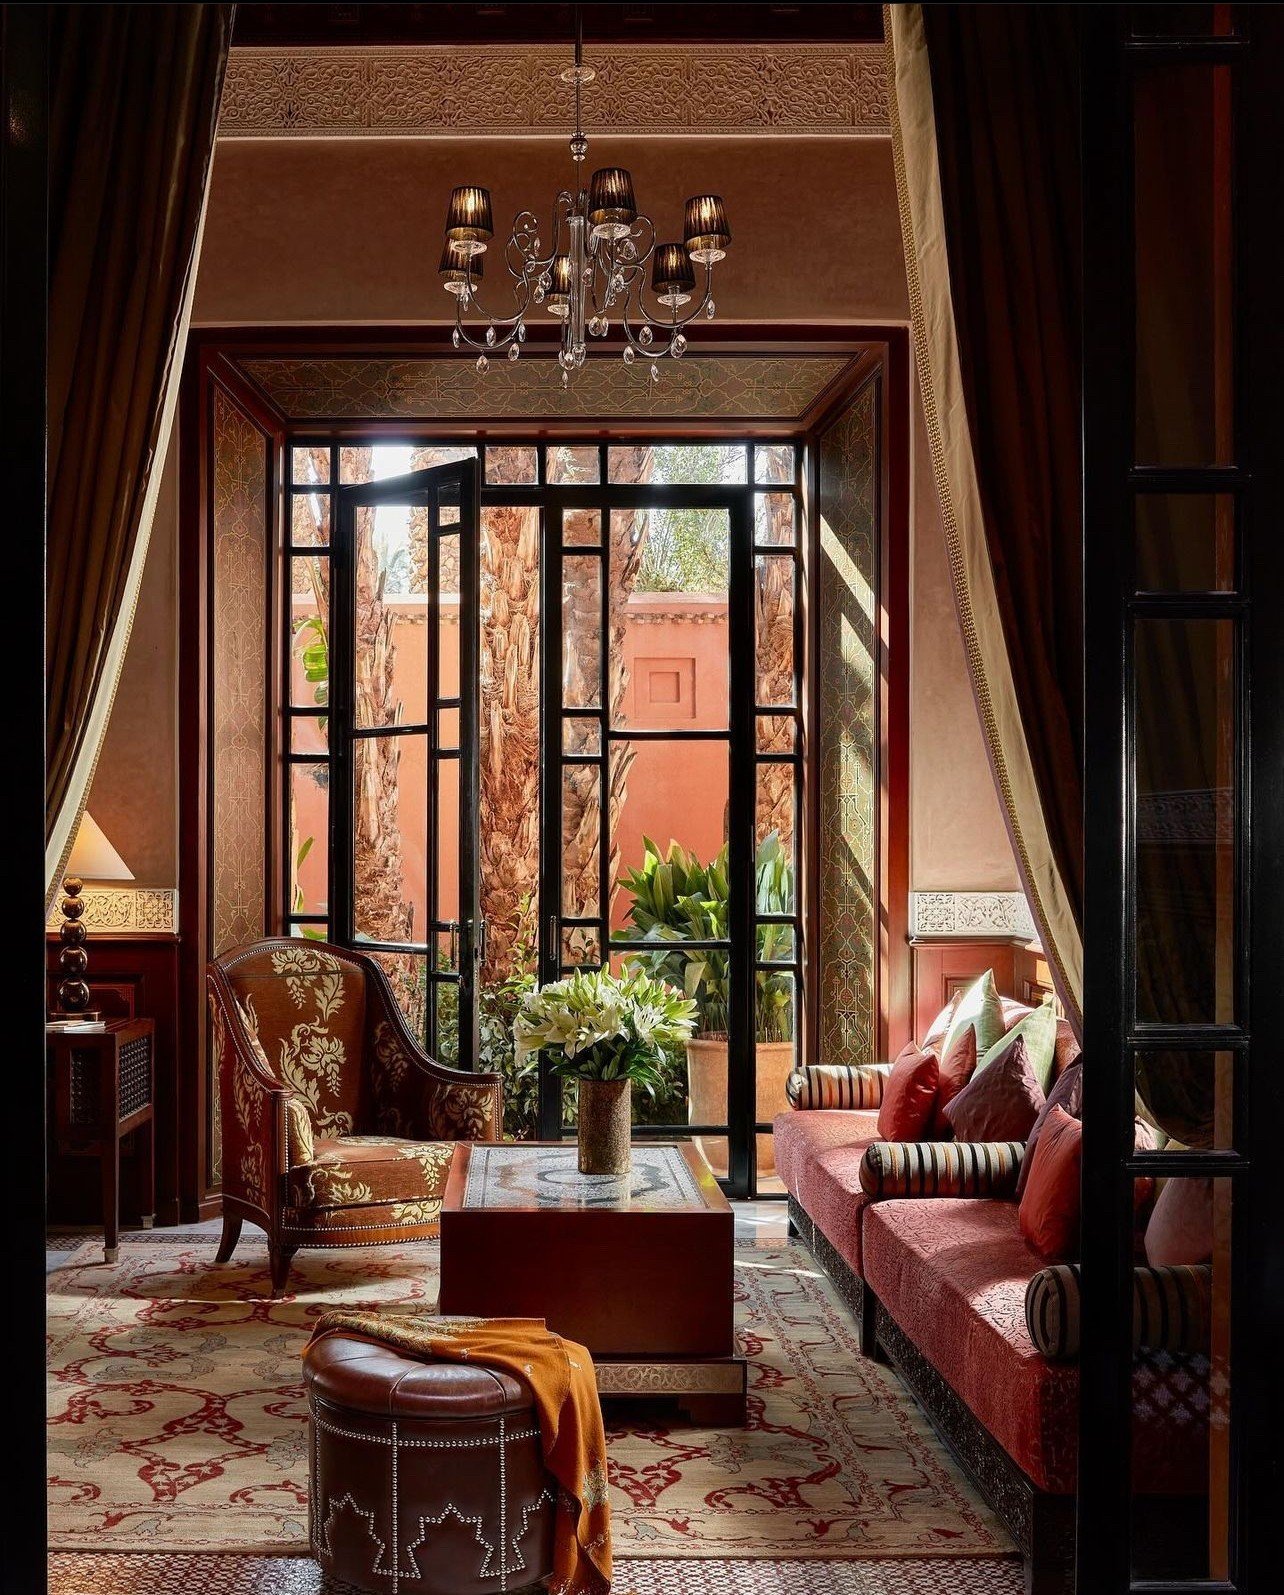 It's the right time to start planning a fall or winter getaway to Morocco. With pleasant temperatures, it's a popular time to visit the culture-rich country. Stay at the @royalmansour in #Marrakech for the spectacular spa and 53 uniquely luxurious ri